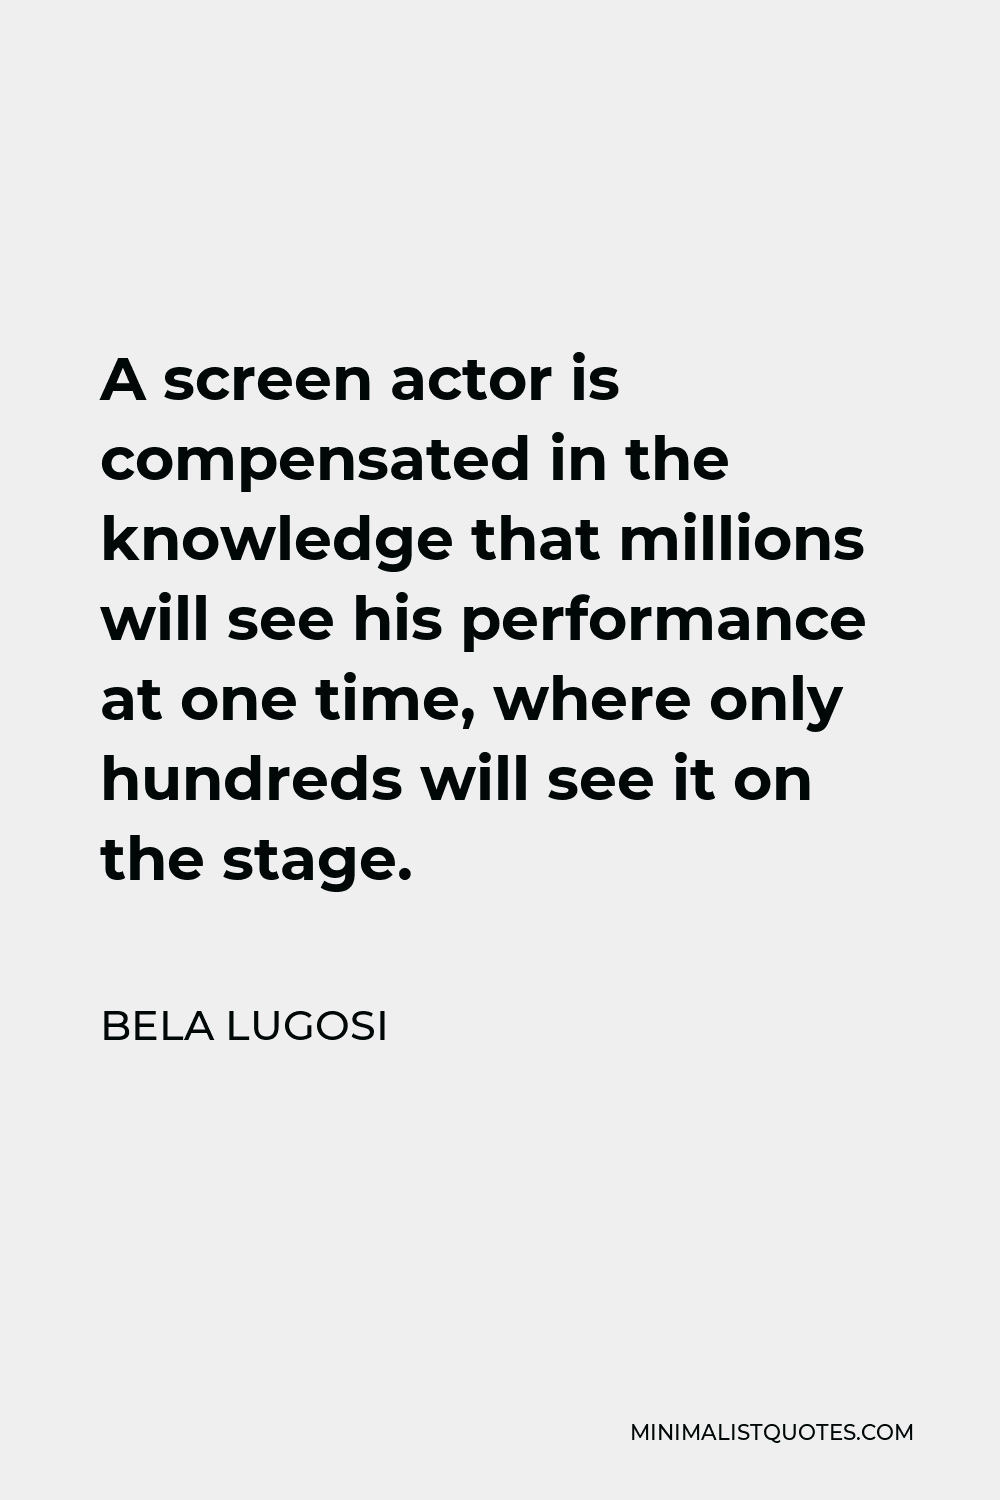 Bela Lugosi Quote - A screen actor is compensated in the knowledge that millions will see his performance at one time, where only hundreds will see it on the stage.